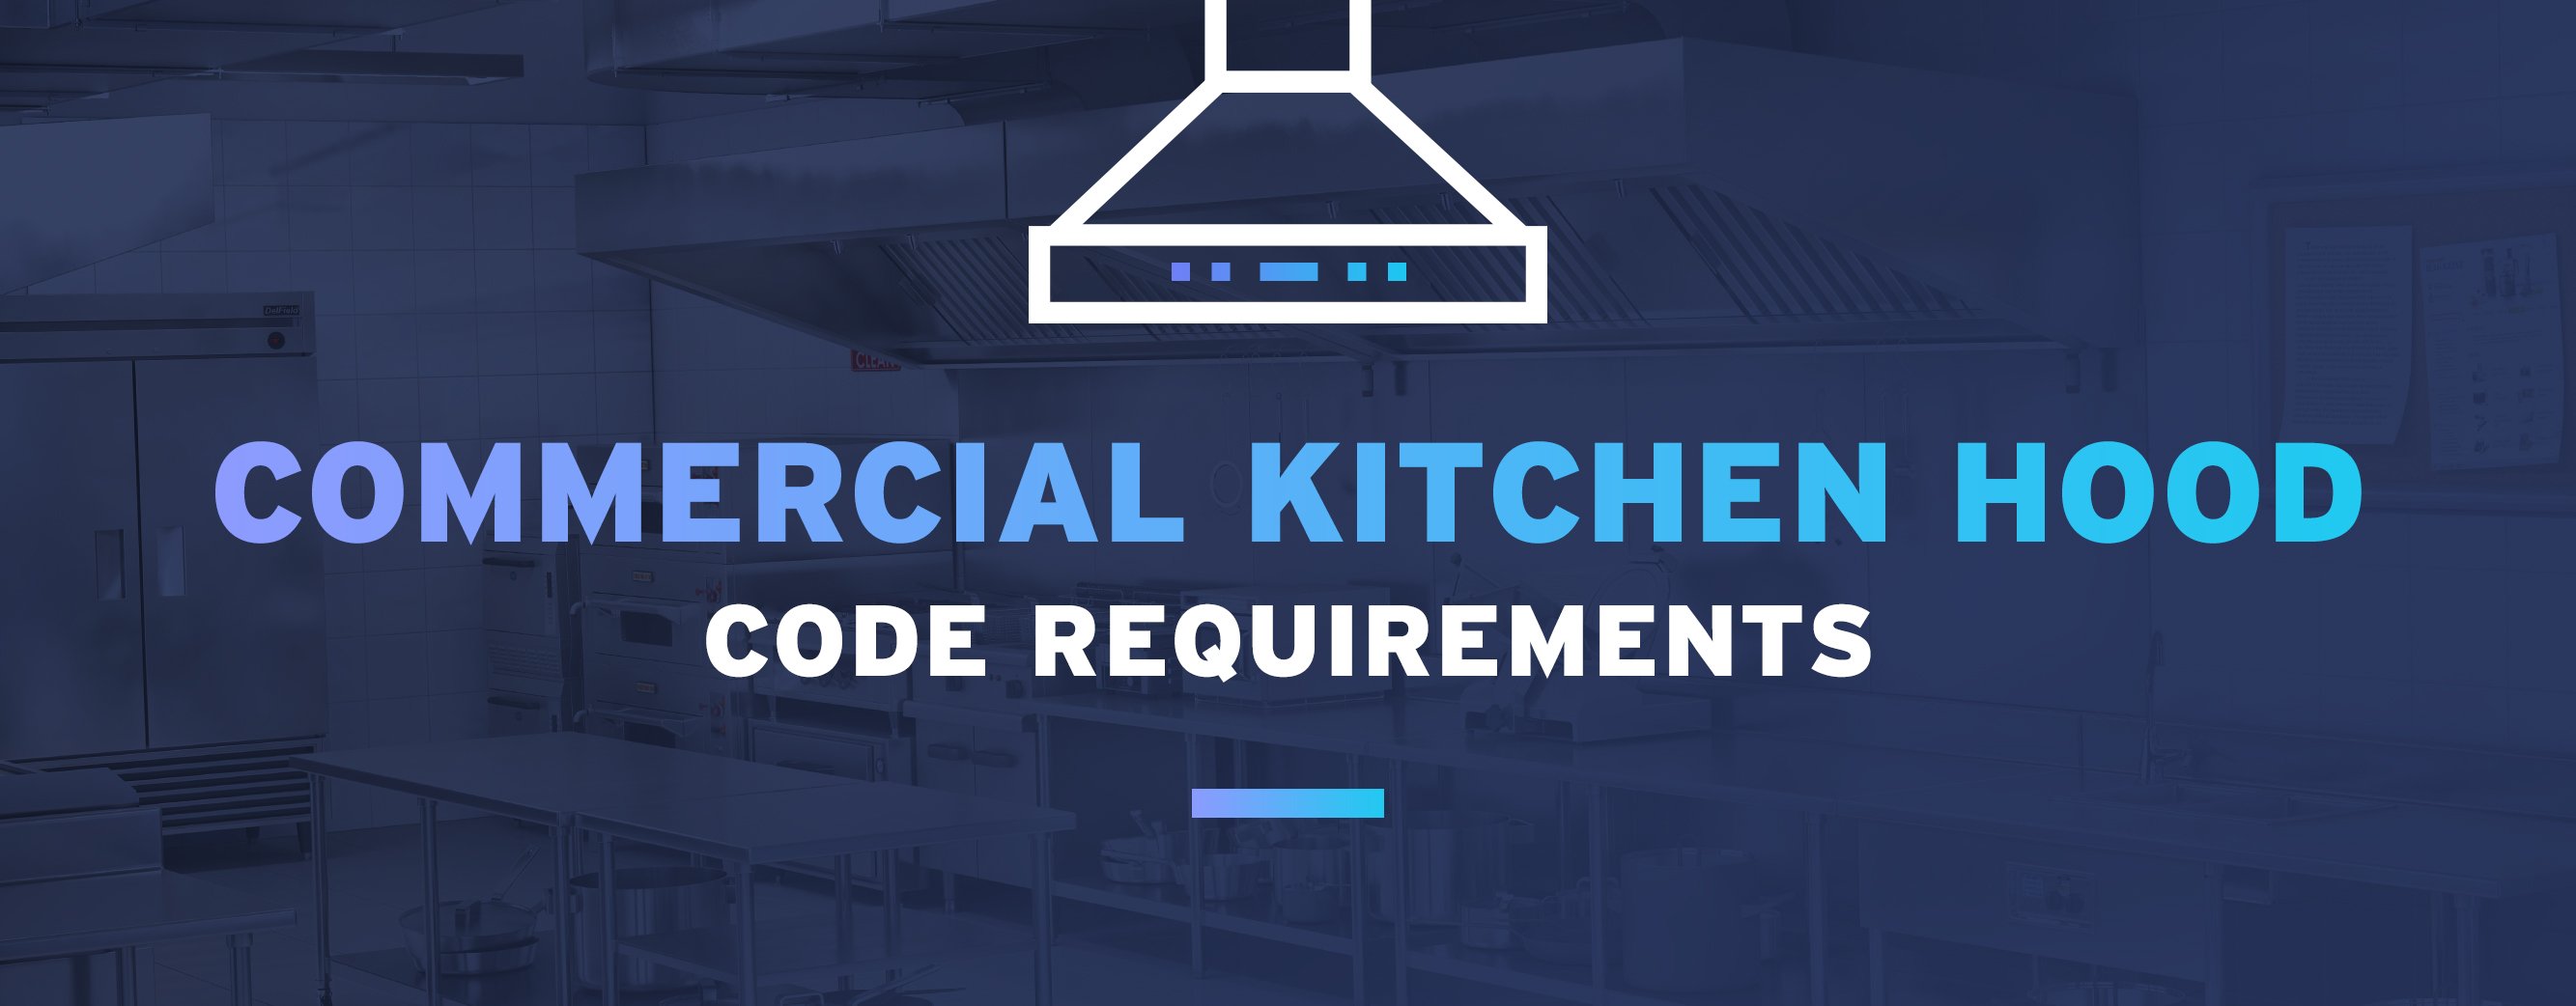 6 Reasons to Maintain Commercial Kitchen Equipment